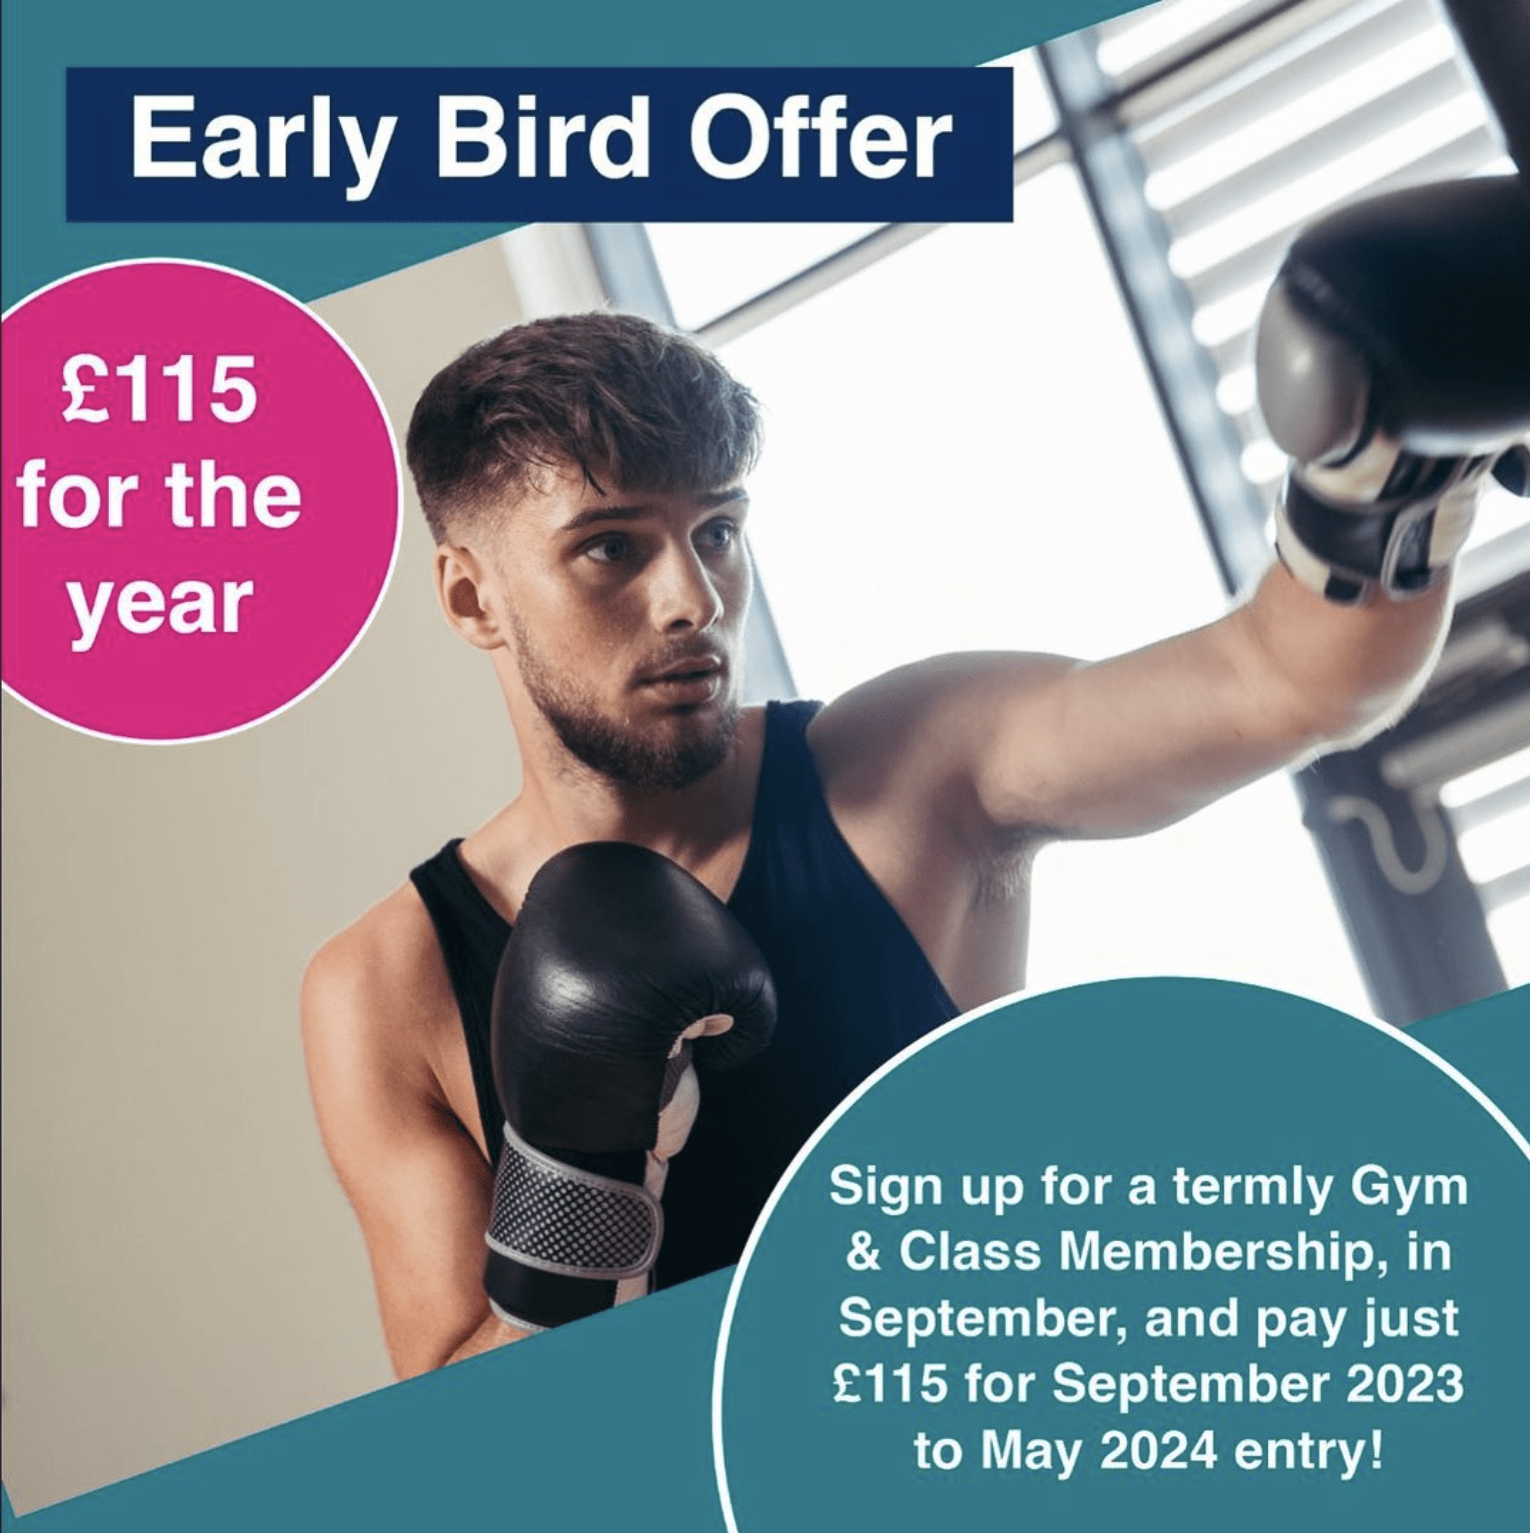 The early bird offer at the university of Lincoln which is £115 for the year from September 2023 to May 2024 including classes 